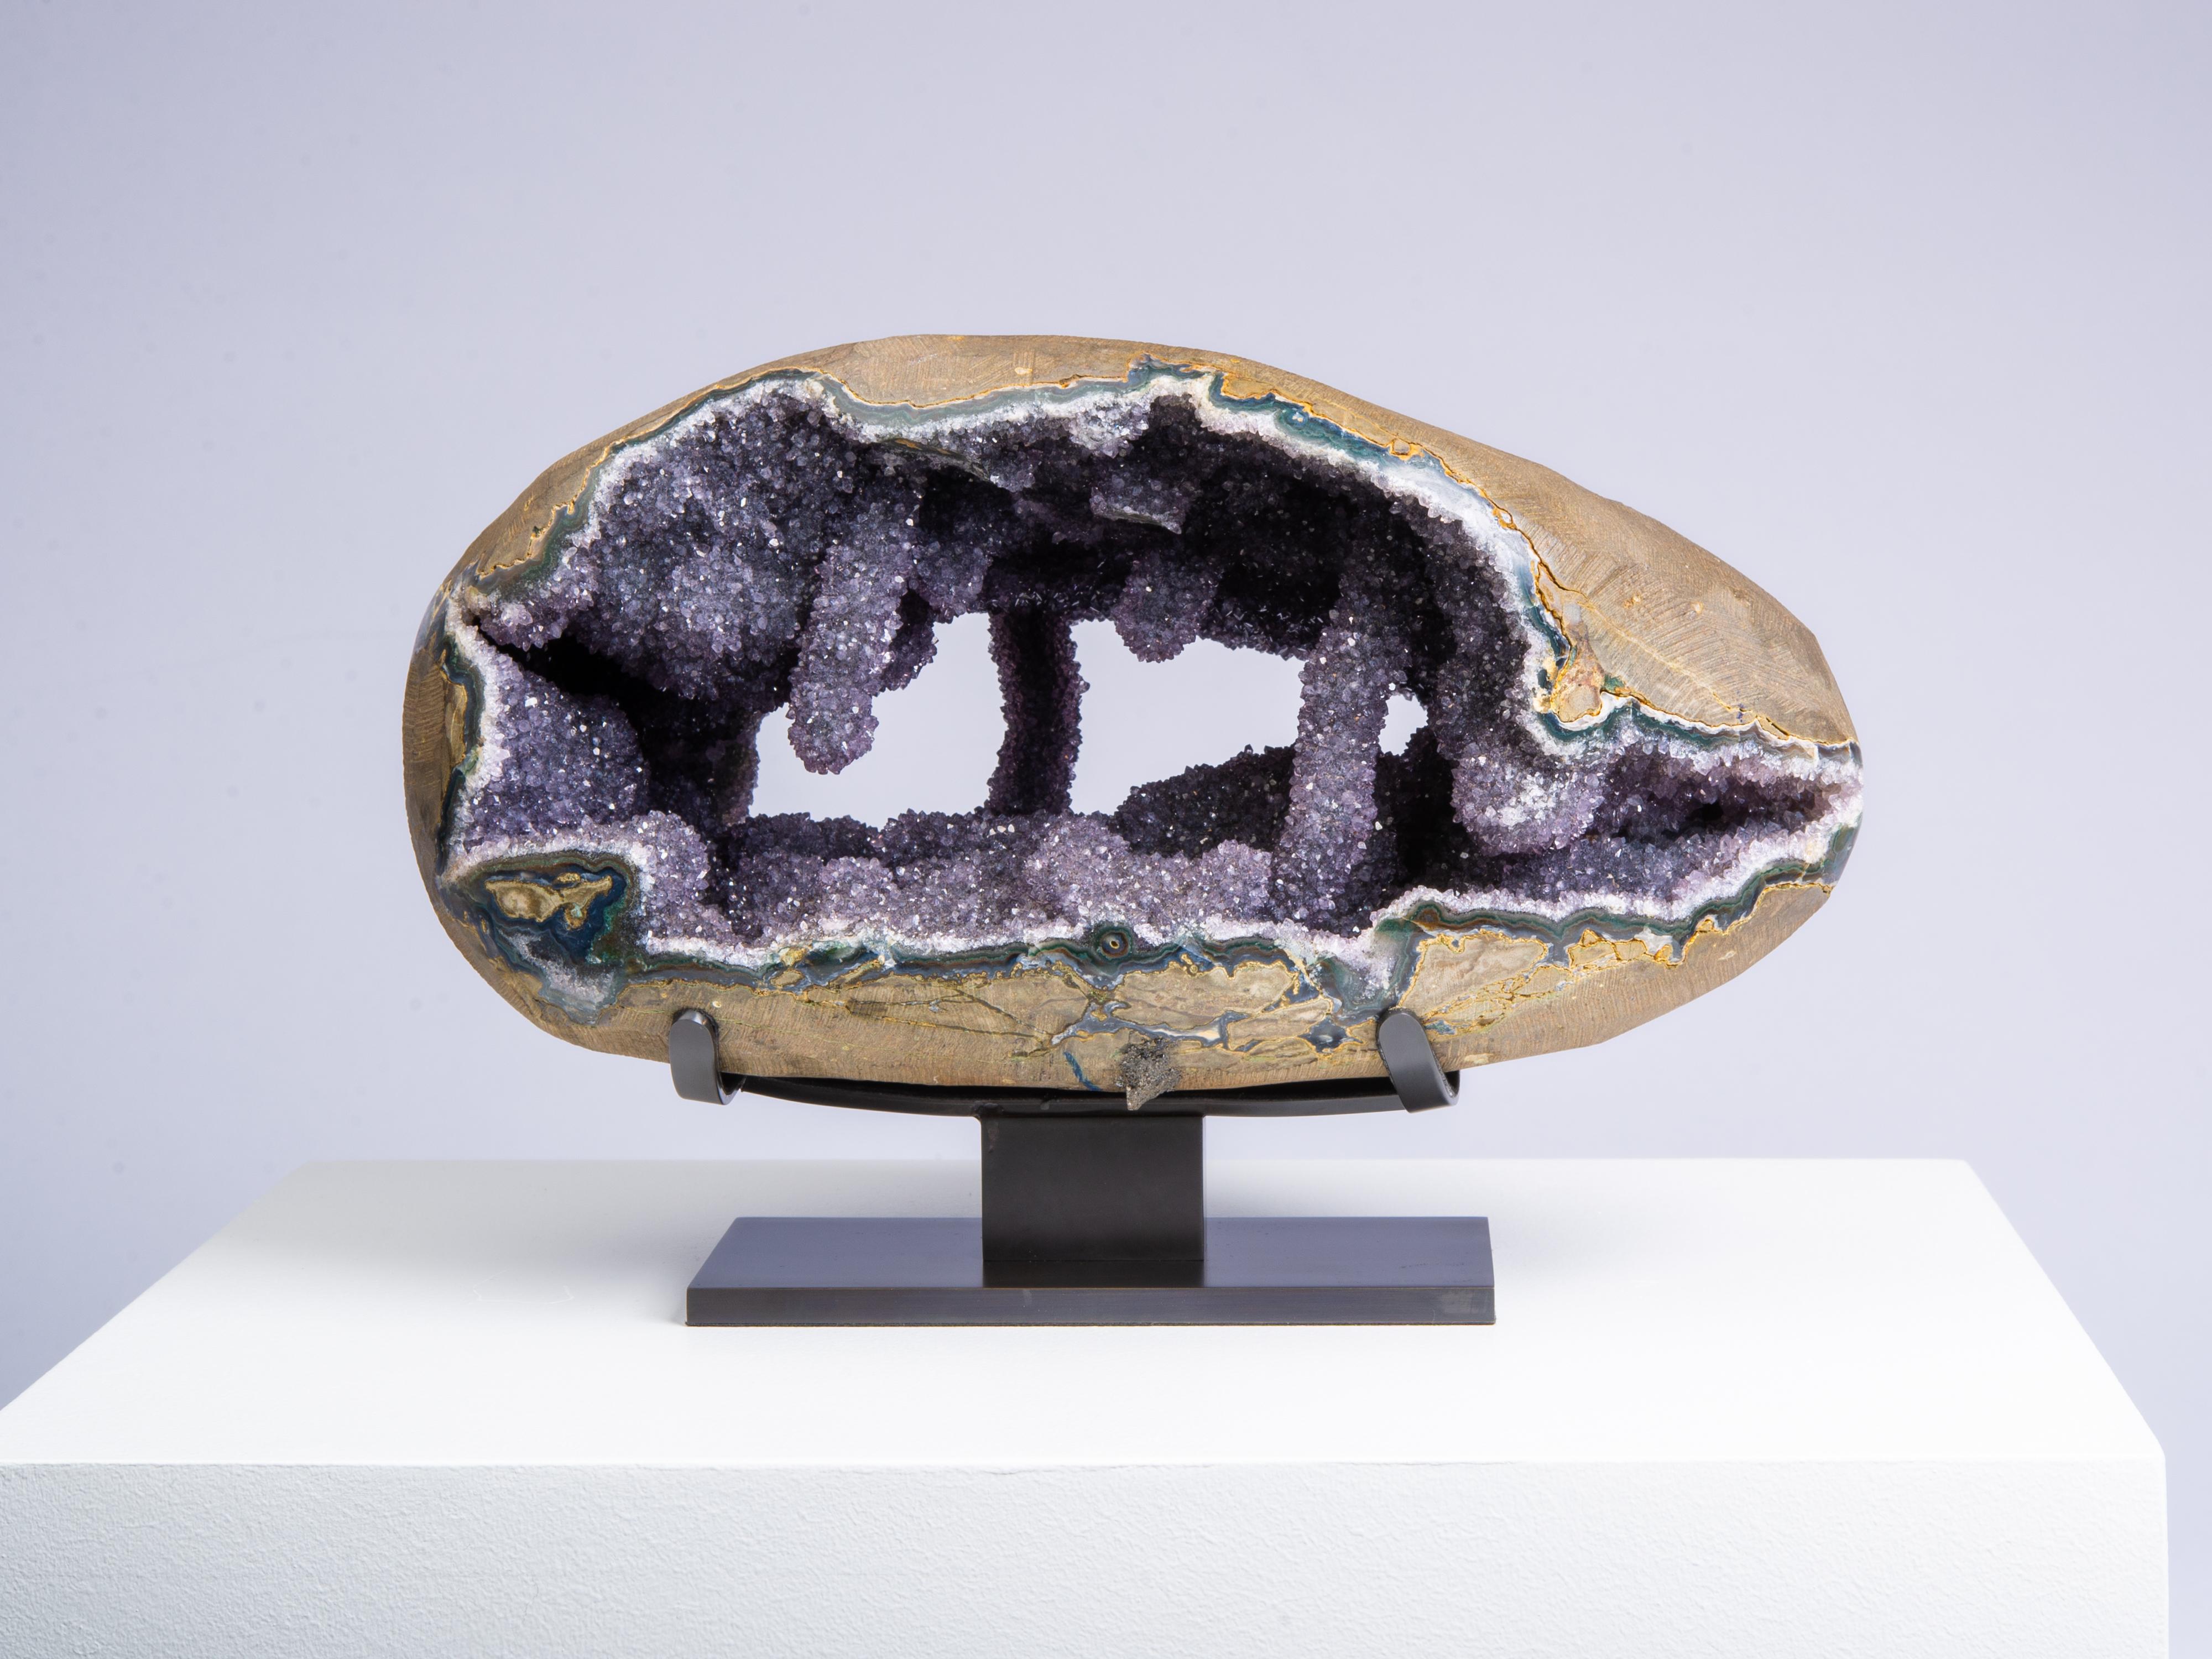 This extraordinary piece is a stunning geode displayed stylishly on a decorative a wooden stand. The interior of the geode comprising a dark grey amethyst Druze with multiple stalactite and stalagmite formations. The outer layer of the piece is in